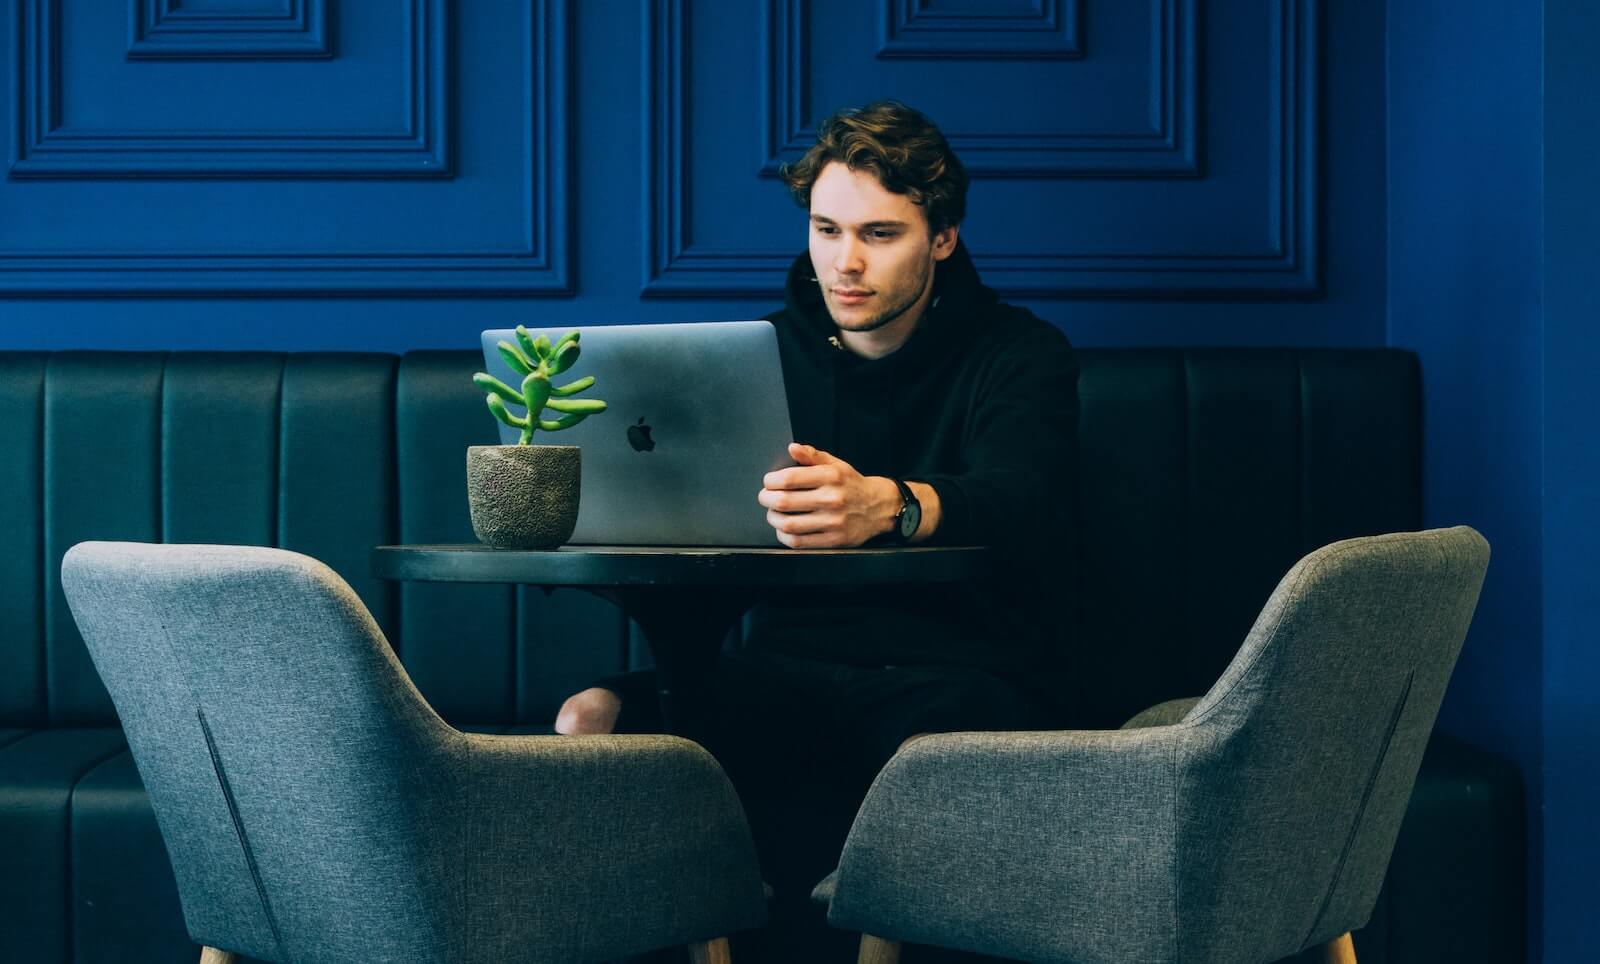 Young man using laptop sitting on small circular table against petrol blue wall